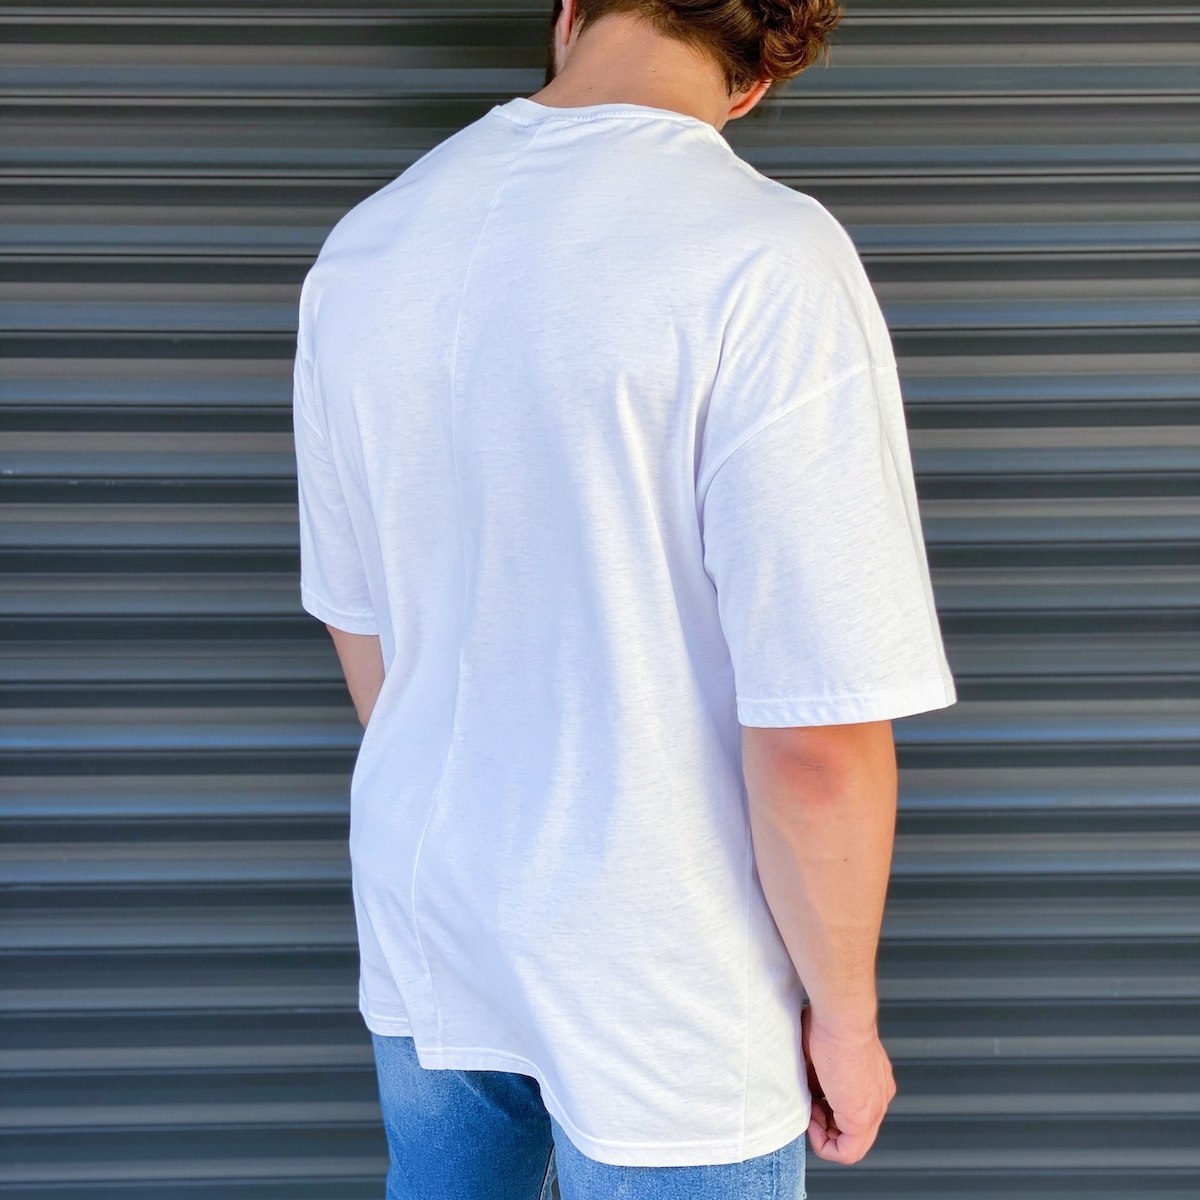 Men's "Nuggets" Oversize T-Shirt In White